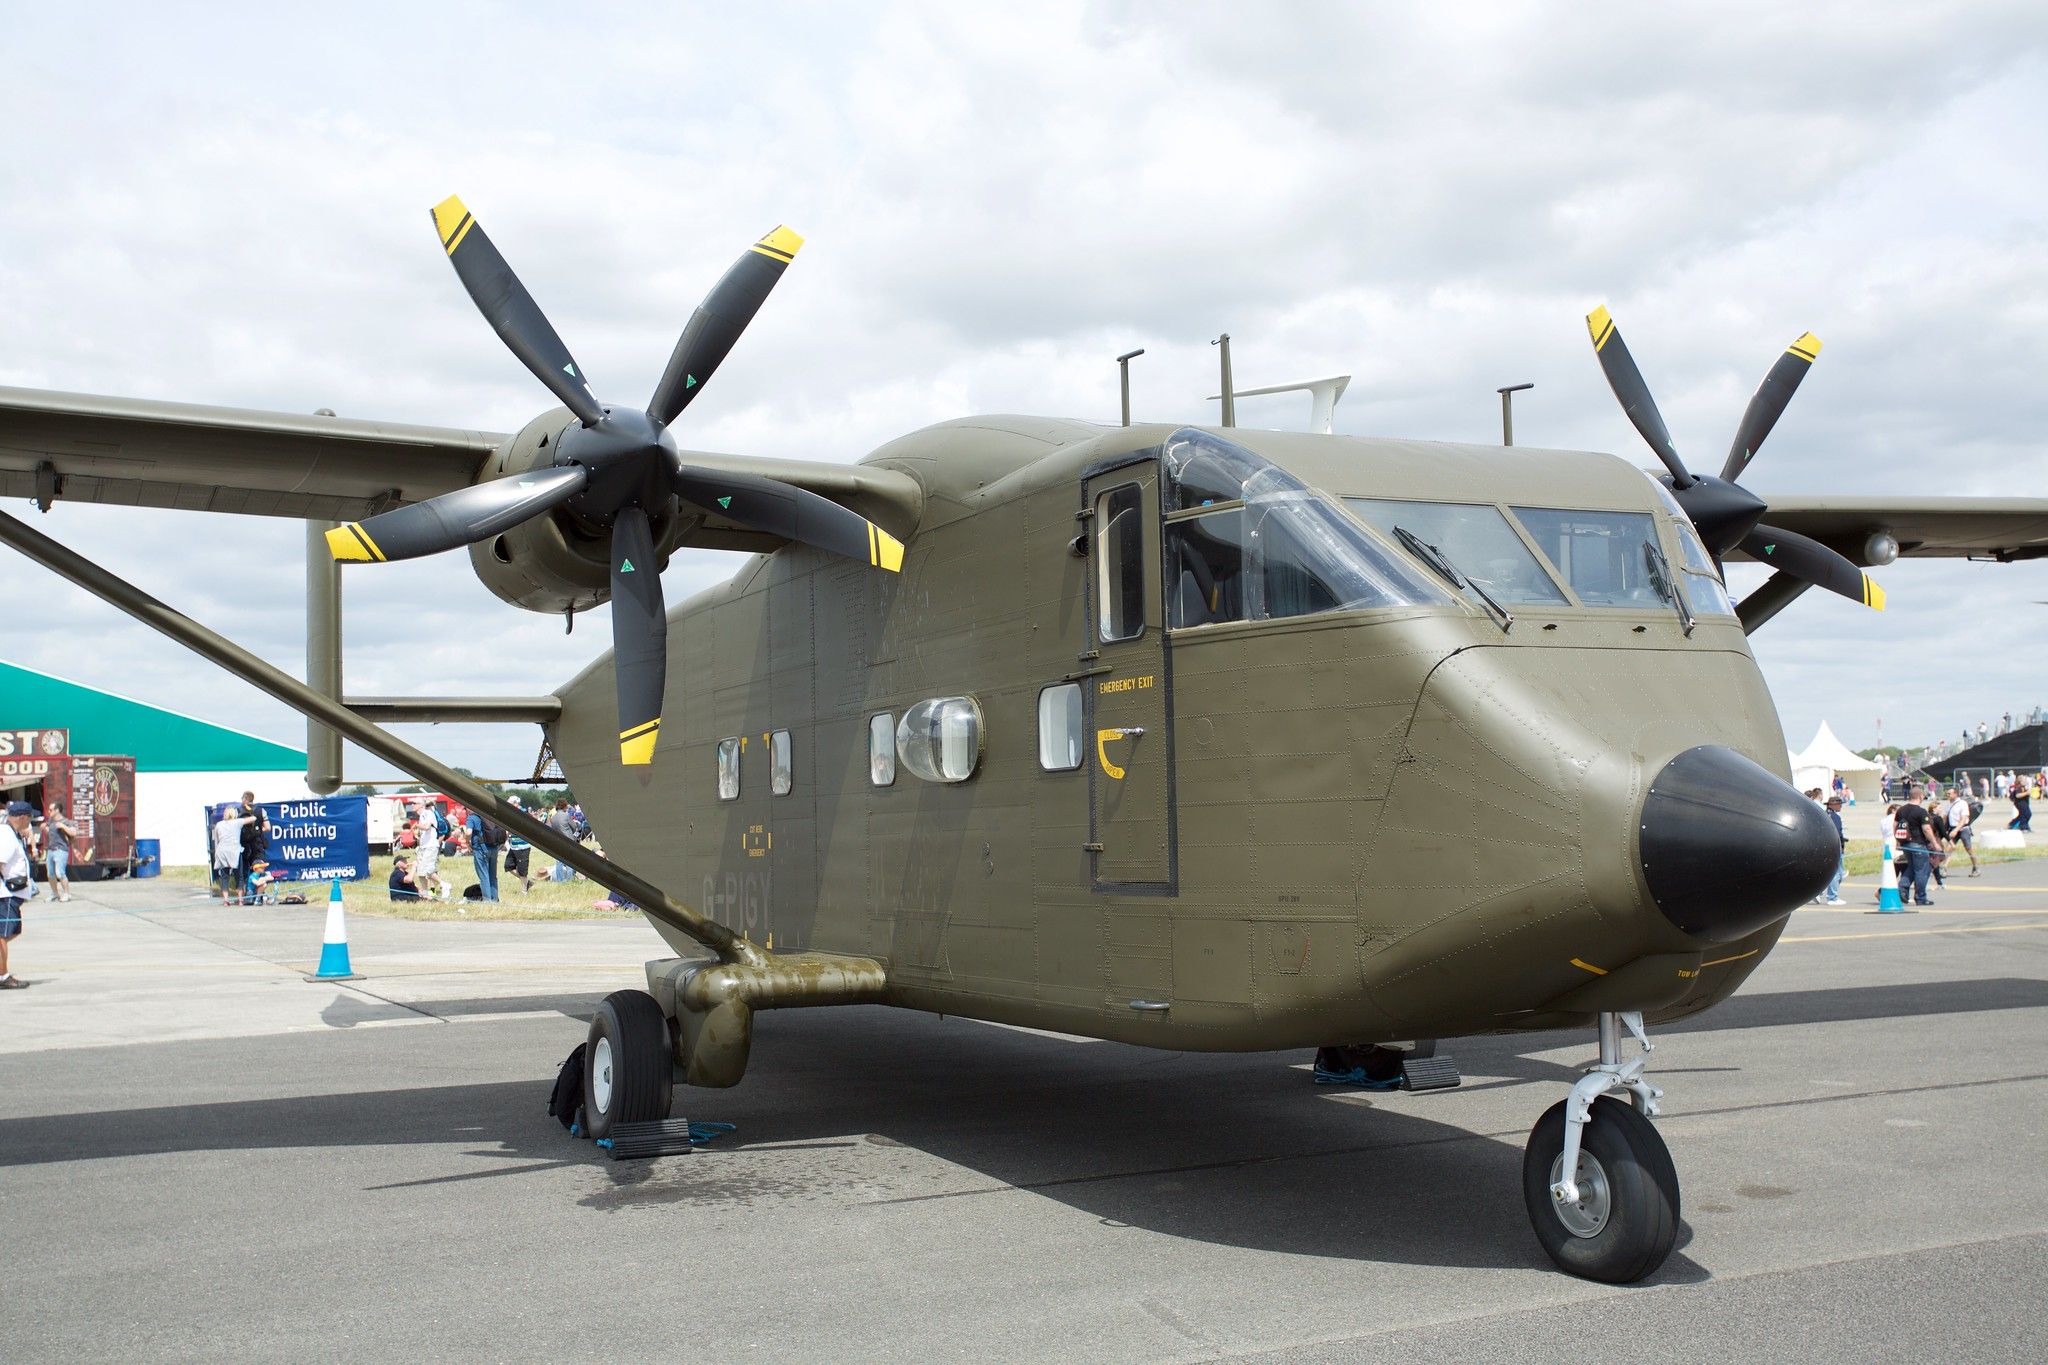 A Short Skyvan parked at an airfield.